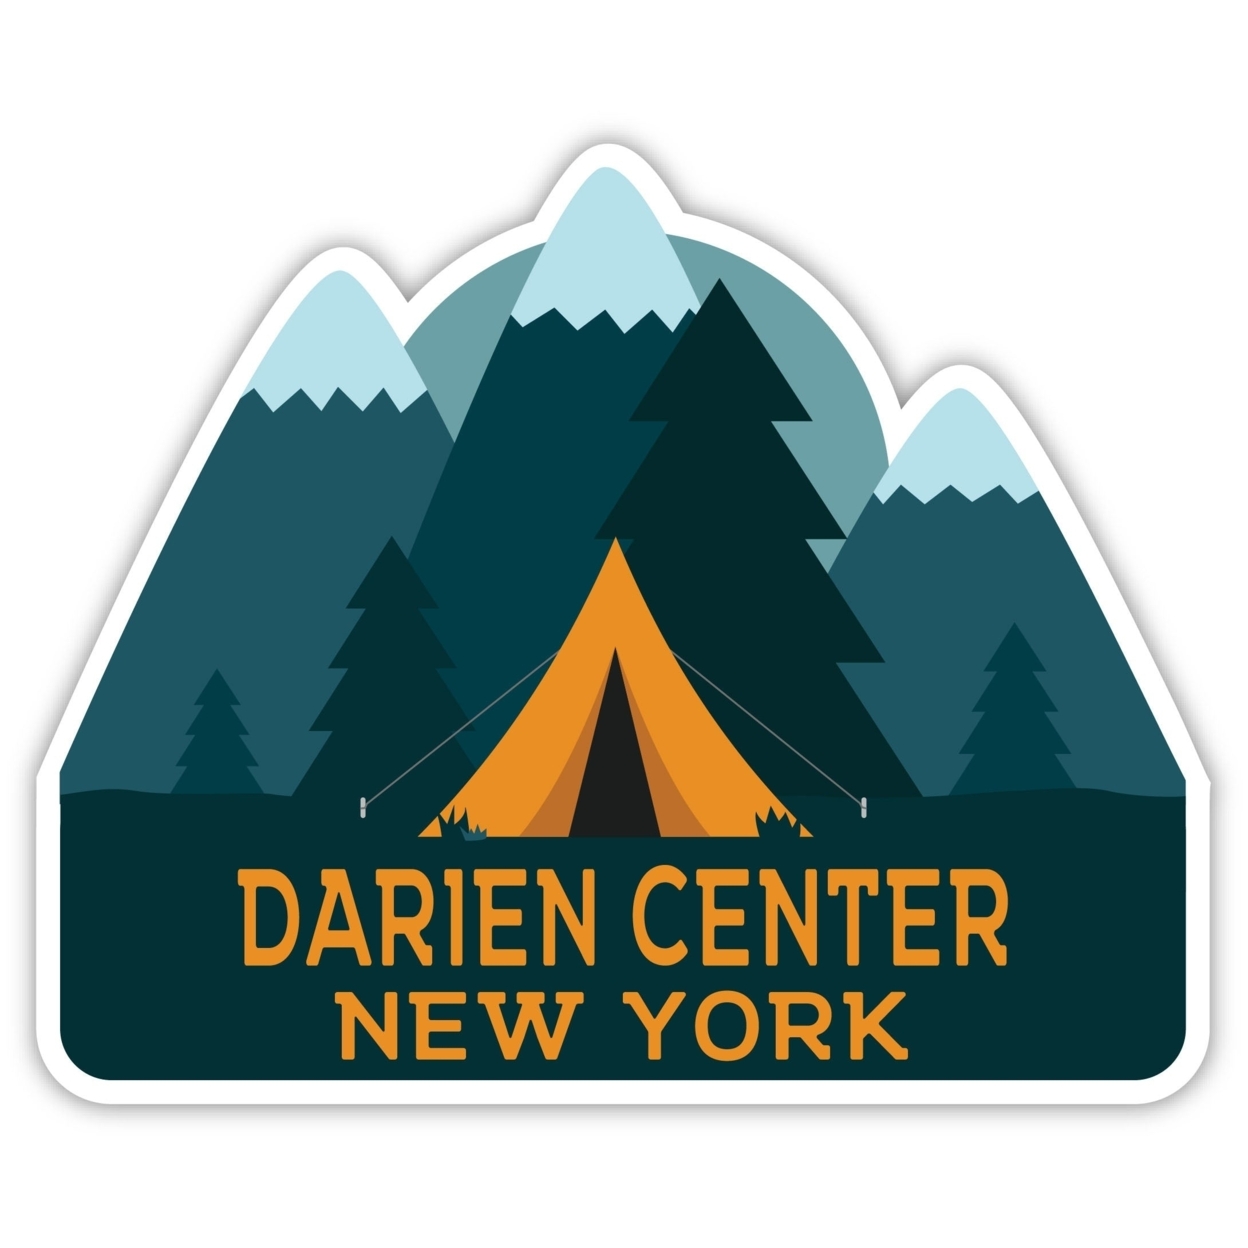 Darien Center New York Souvenir Decorative Stickers (Choose Theme And Size) - 4-Pack, 8-Inch, Tent